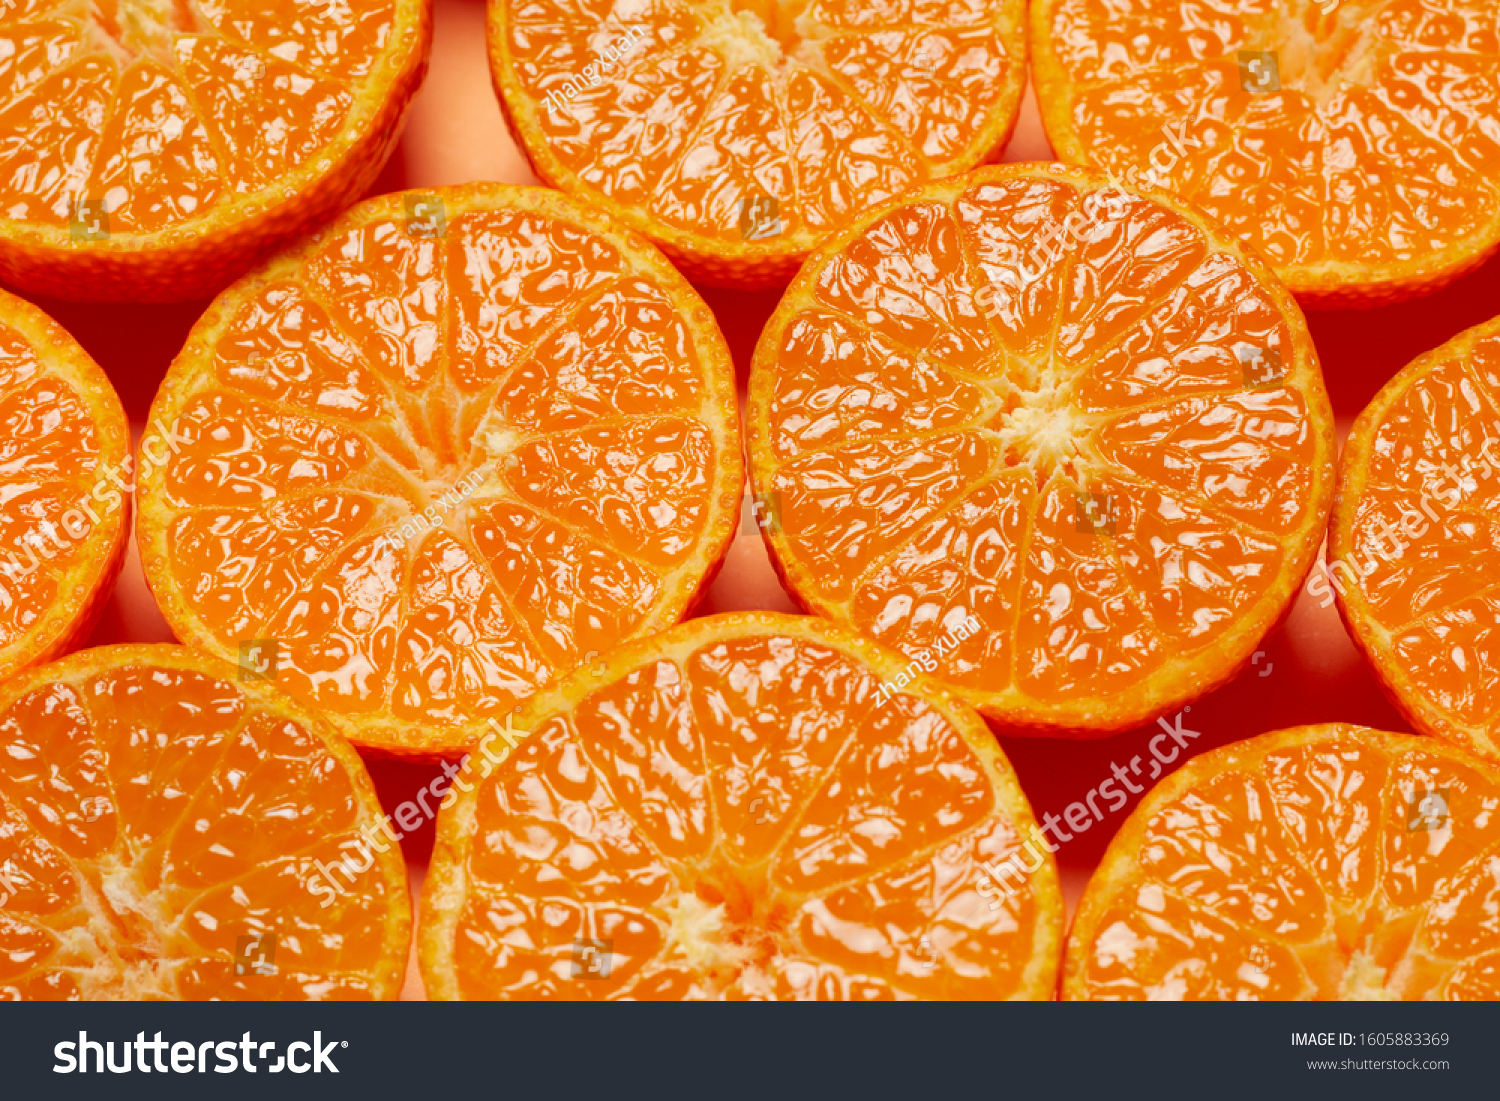 Slices of fresh oranges as a background, top view.  #1605883369